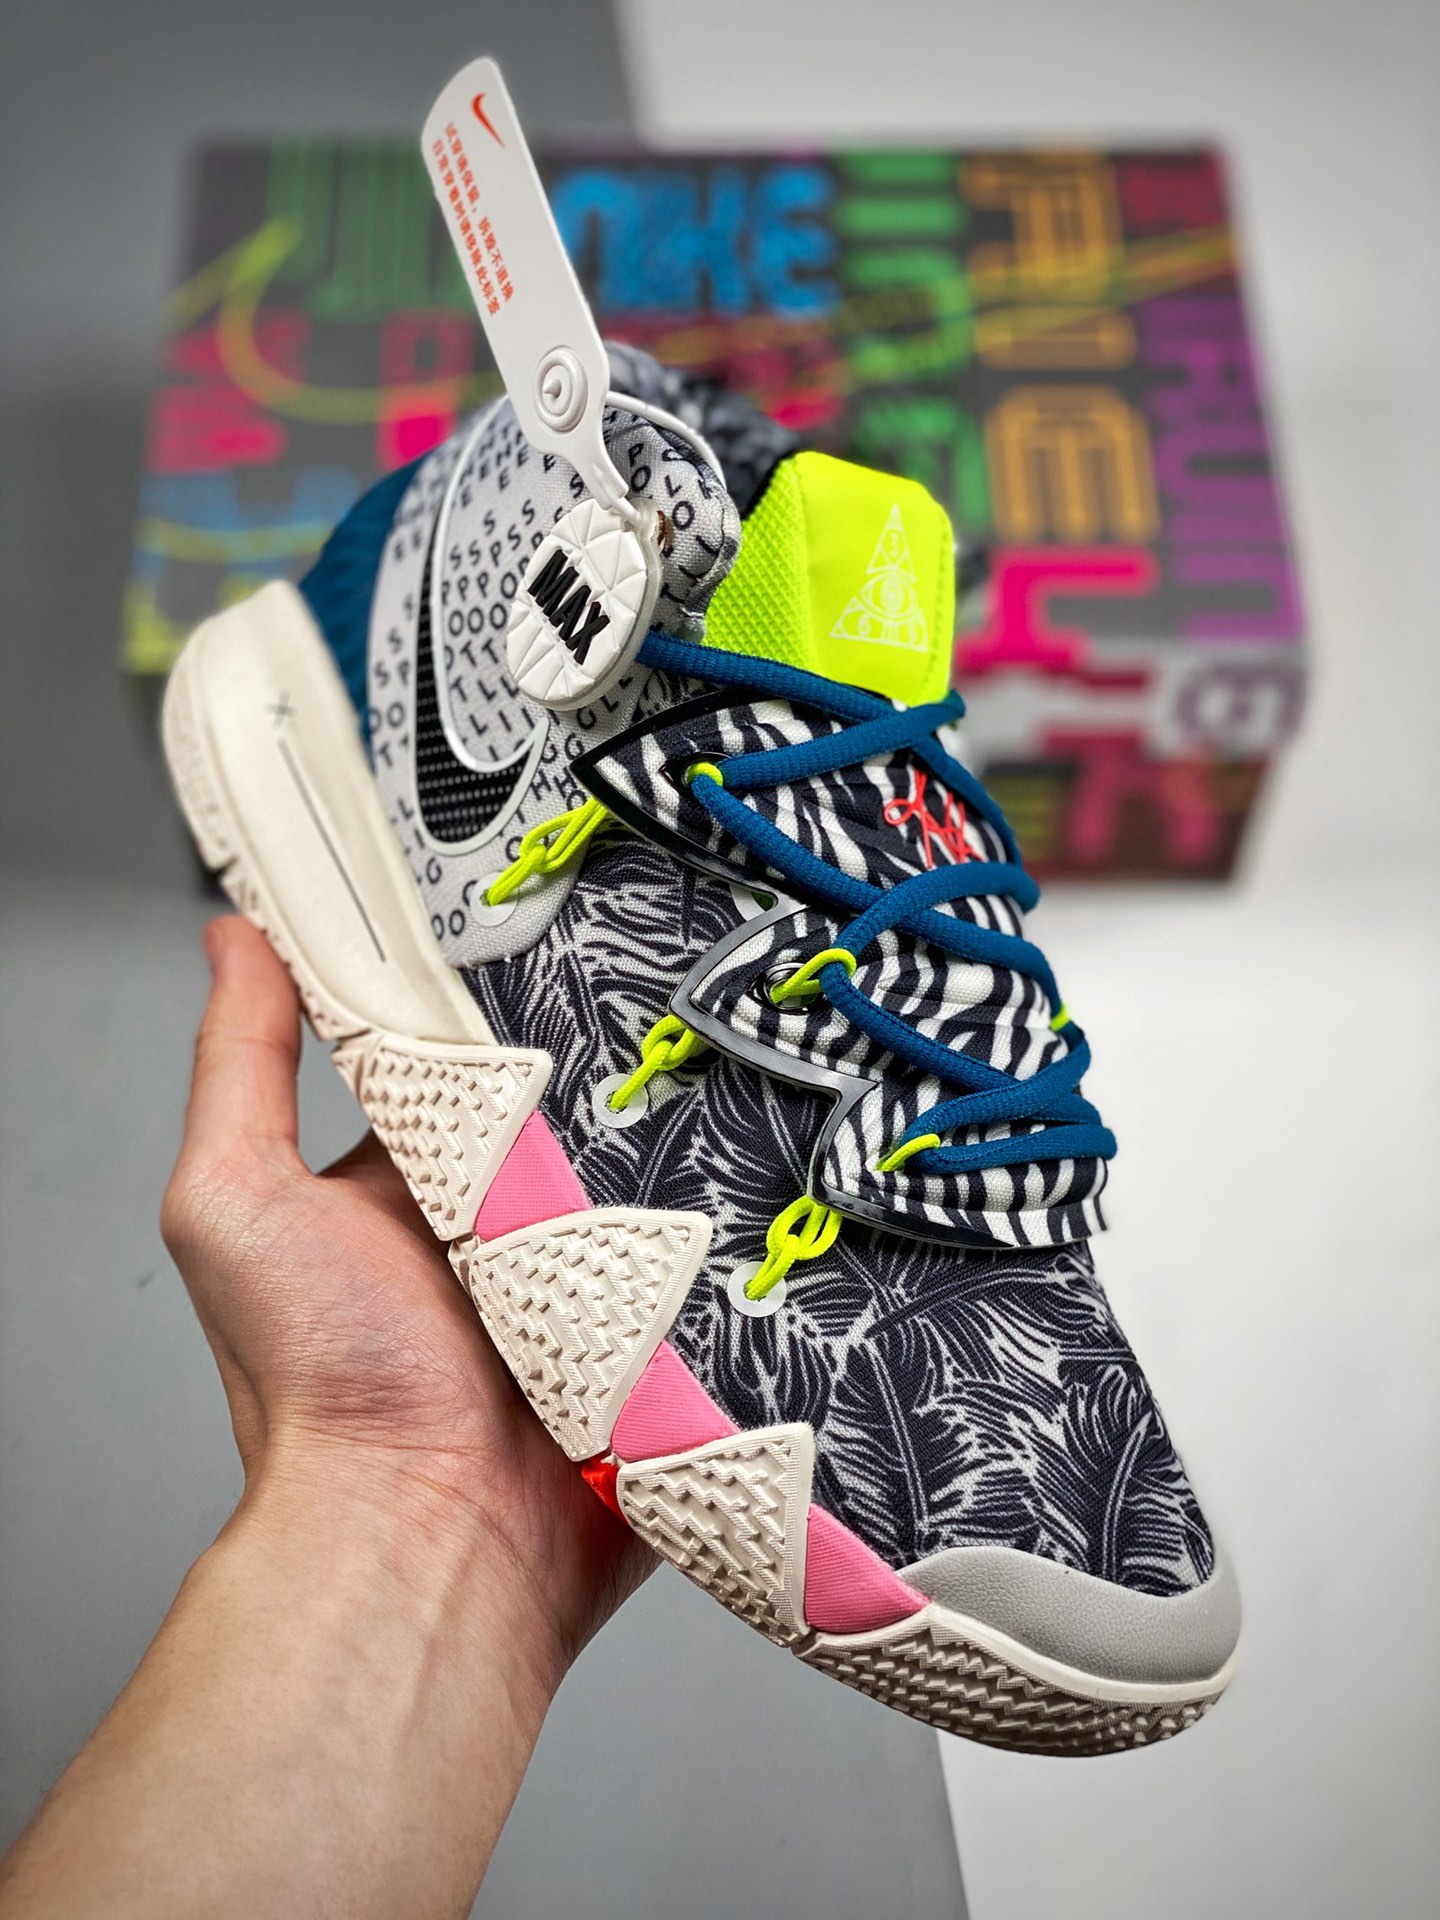 Nike Kybrid S2 'What The 2.0' Black White Grey Neon Shoes